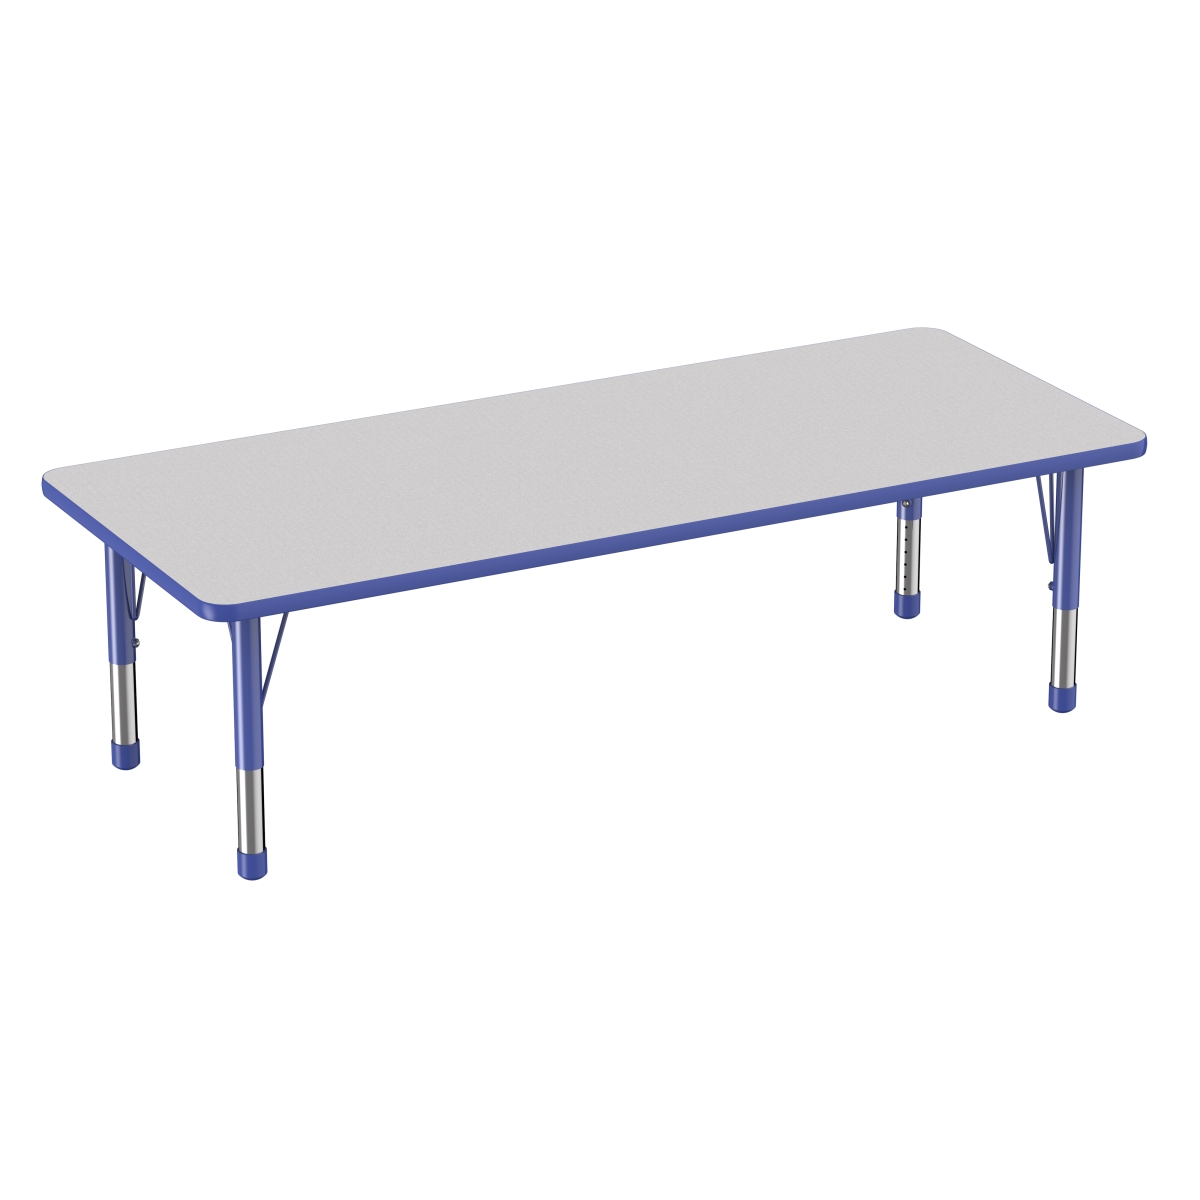 10029-gybl 30 X 72 In. Rectangle T-mold Adjustable Activity Table With Chunky Leg - Grey & Blue